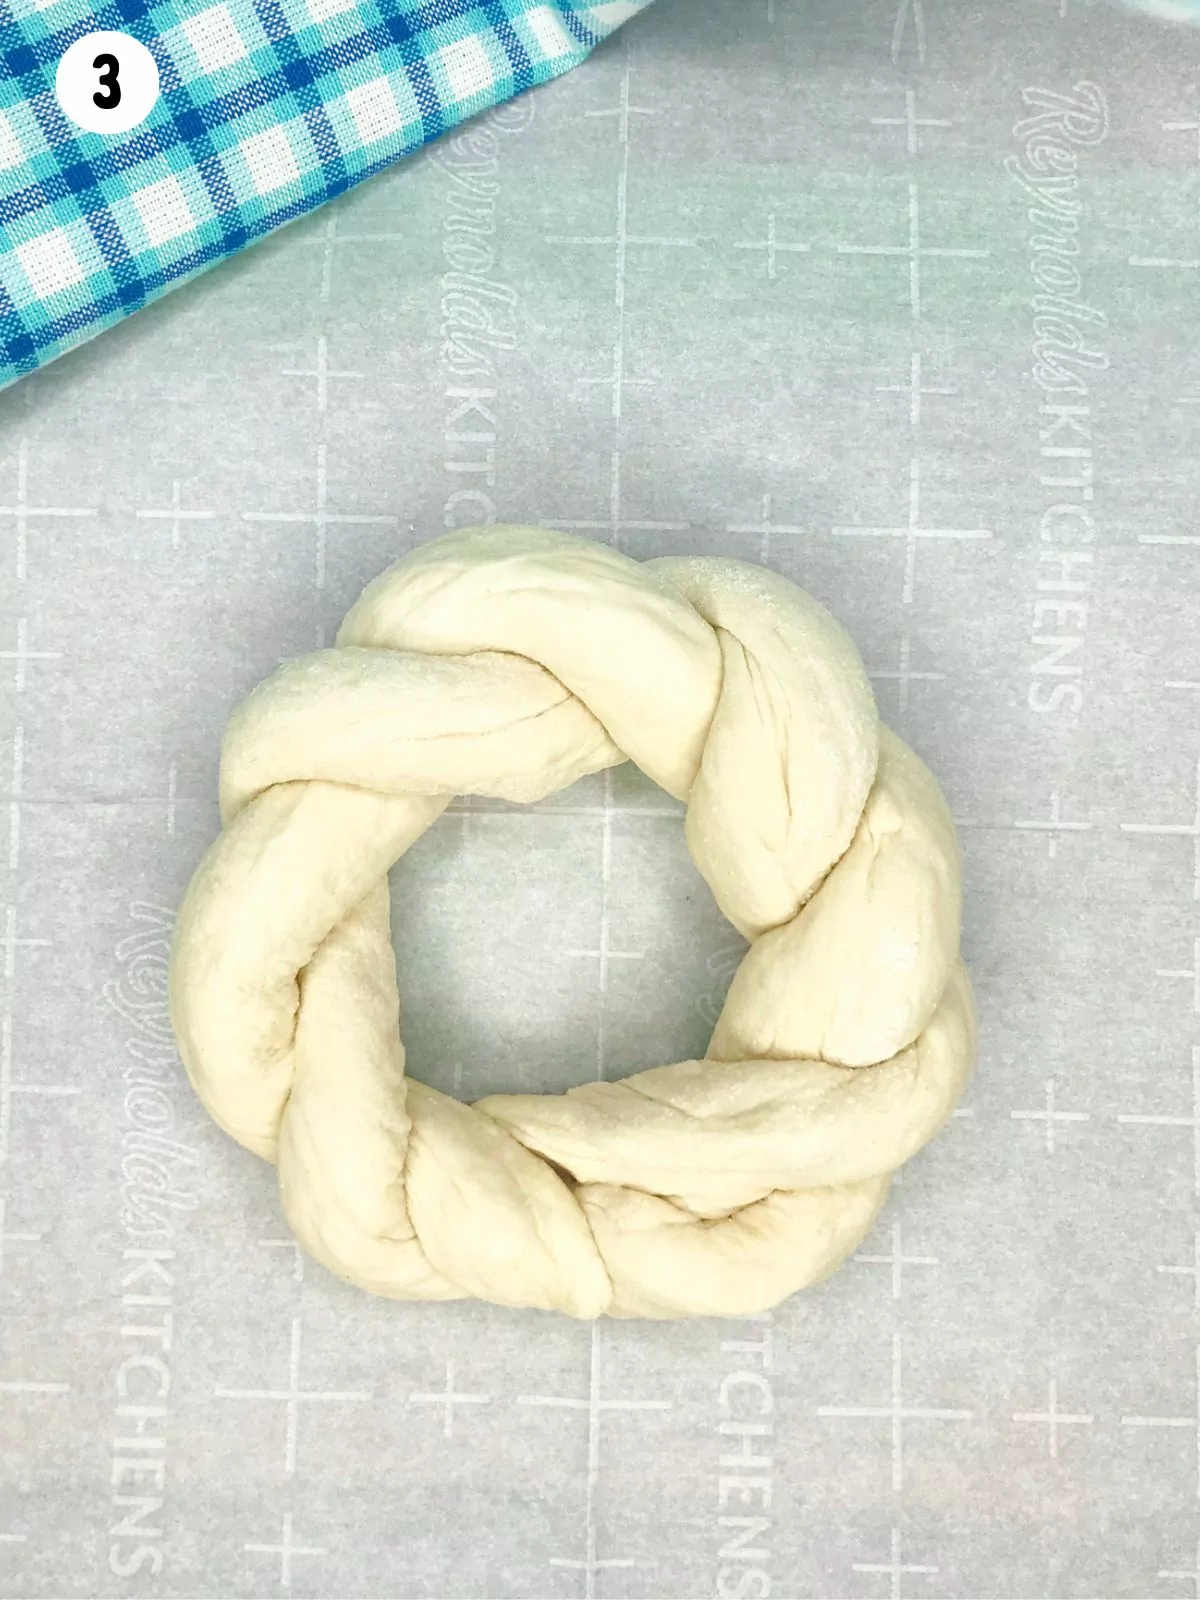 frozen bread dough defrosted and shaped into a rope ring.